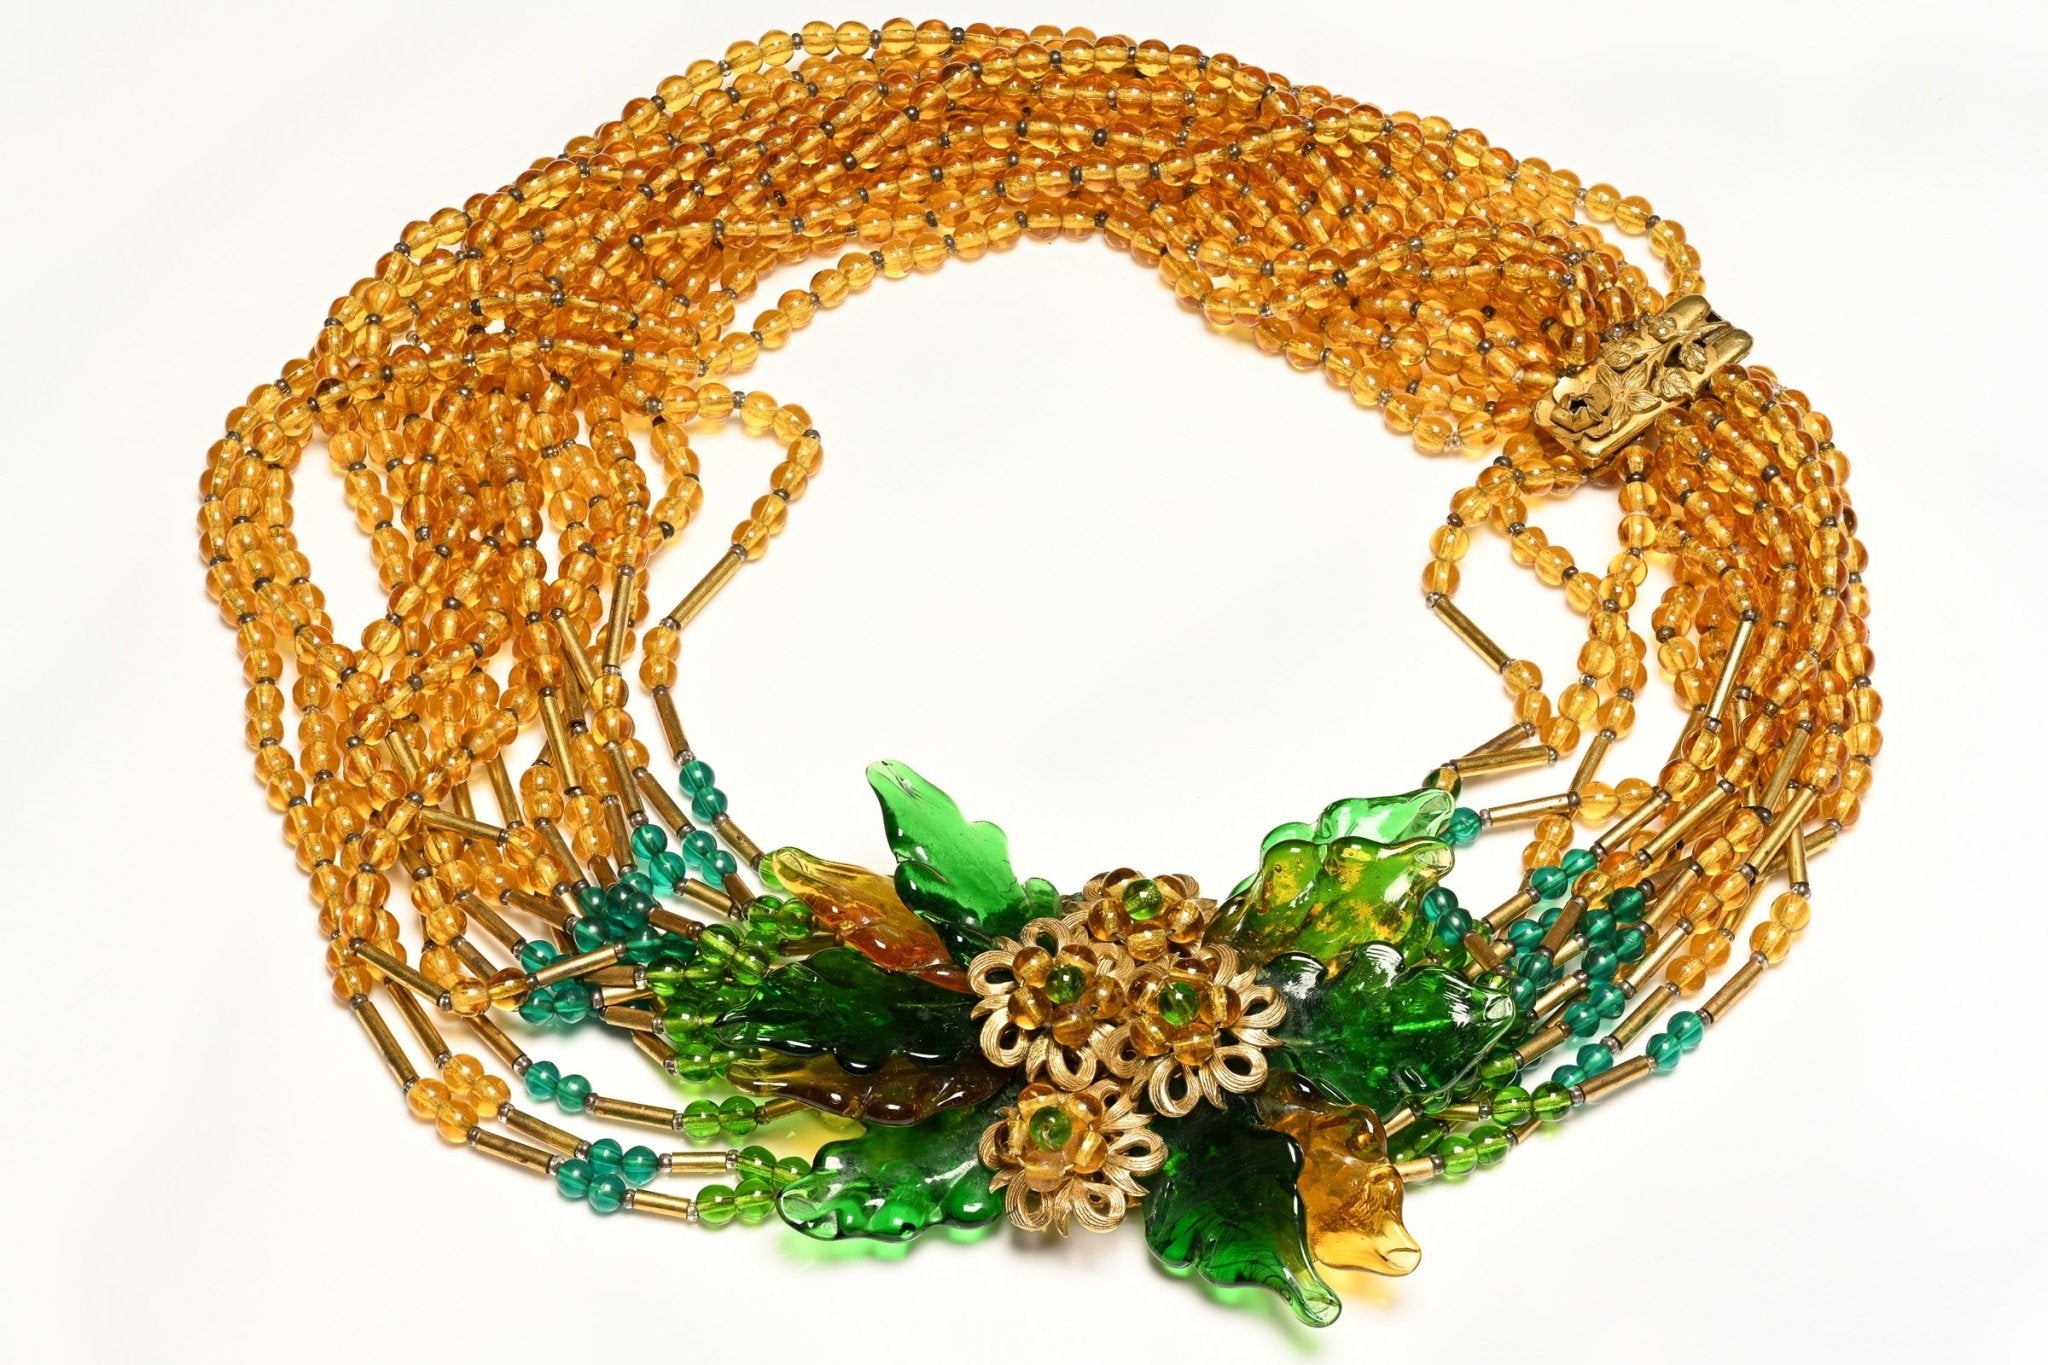 Vintage 1930's Miriam Haskell Brown Green Glass Beads Leaf Collar Necklace